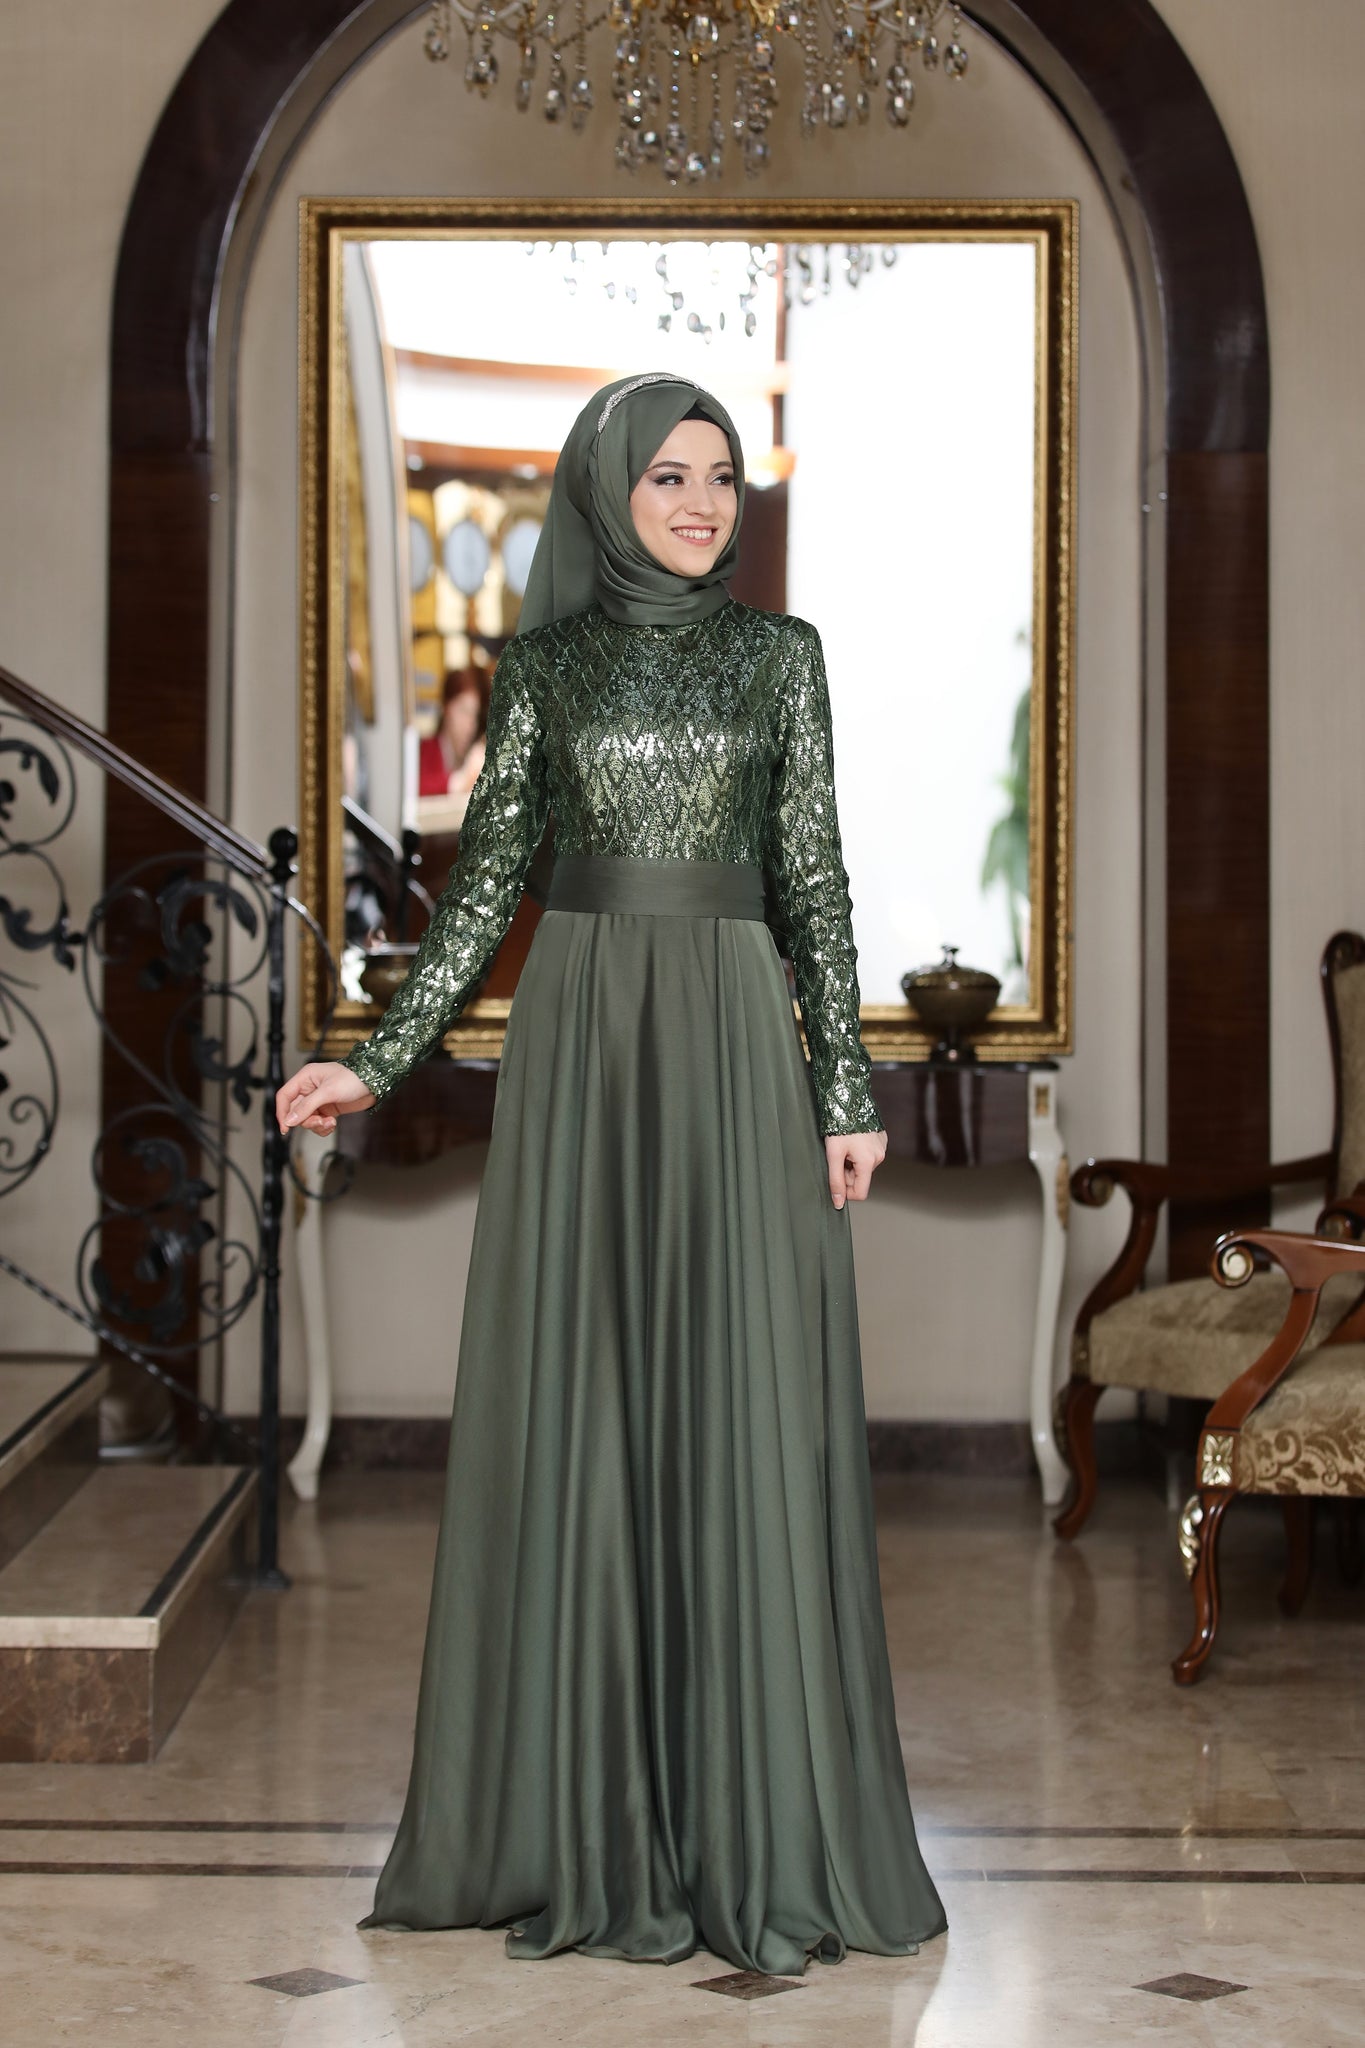 olive evening gown